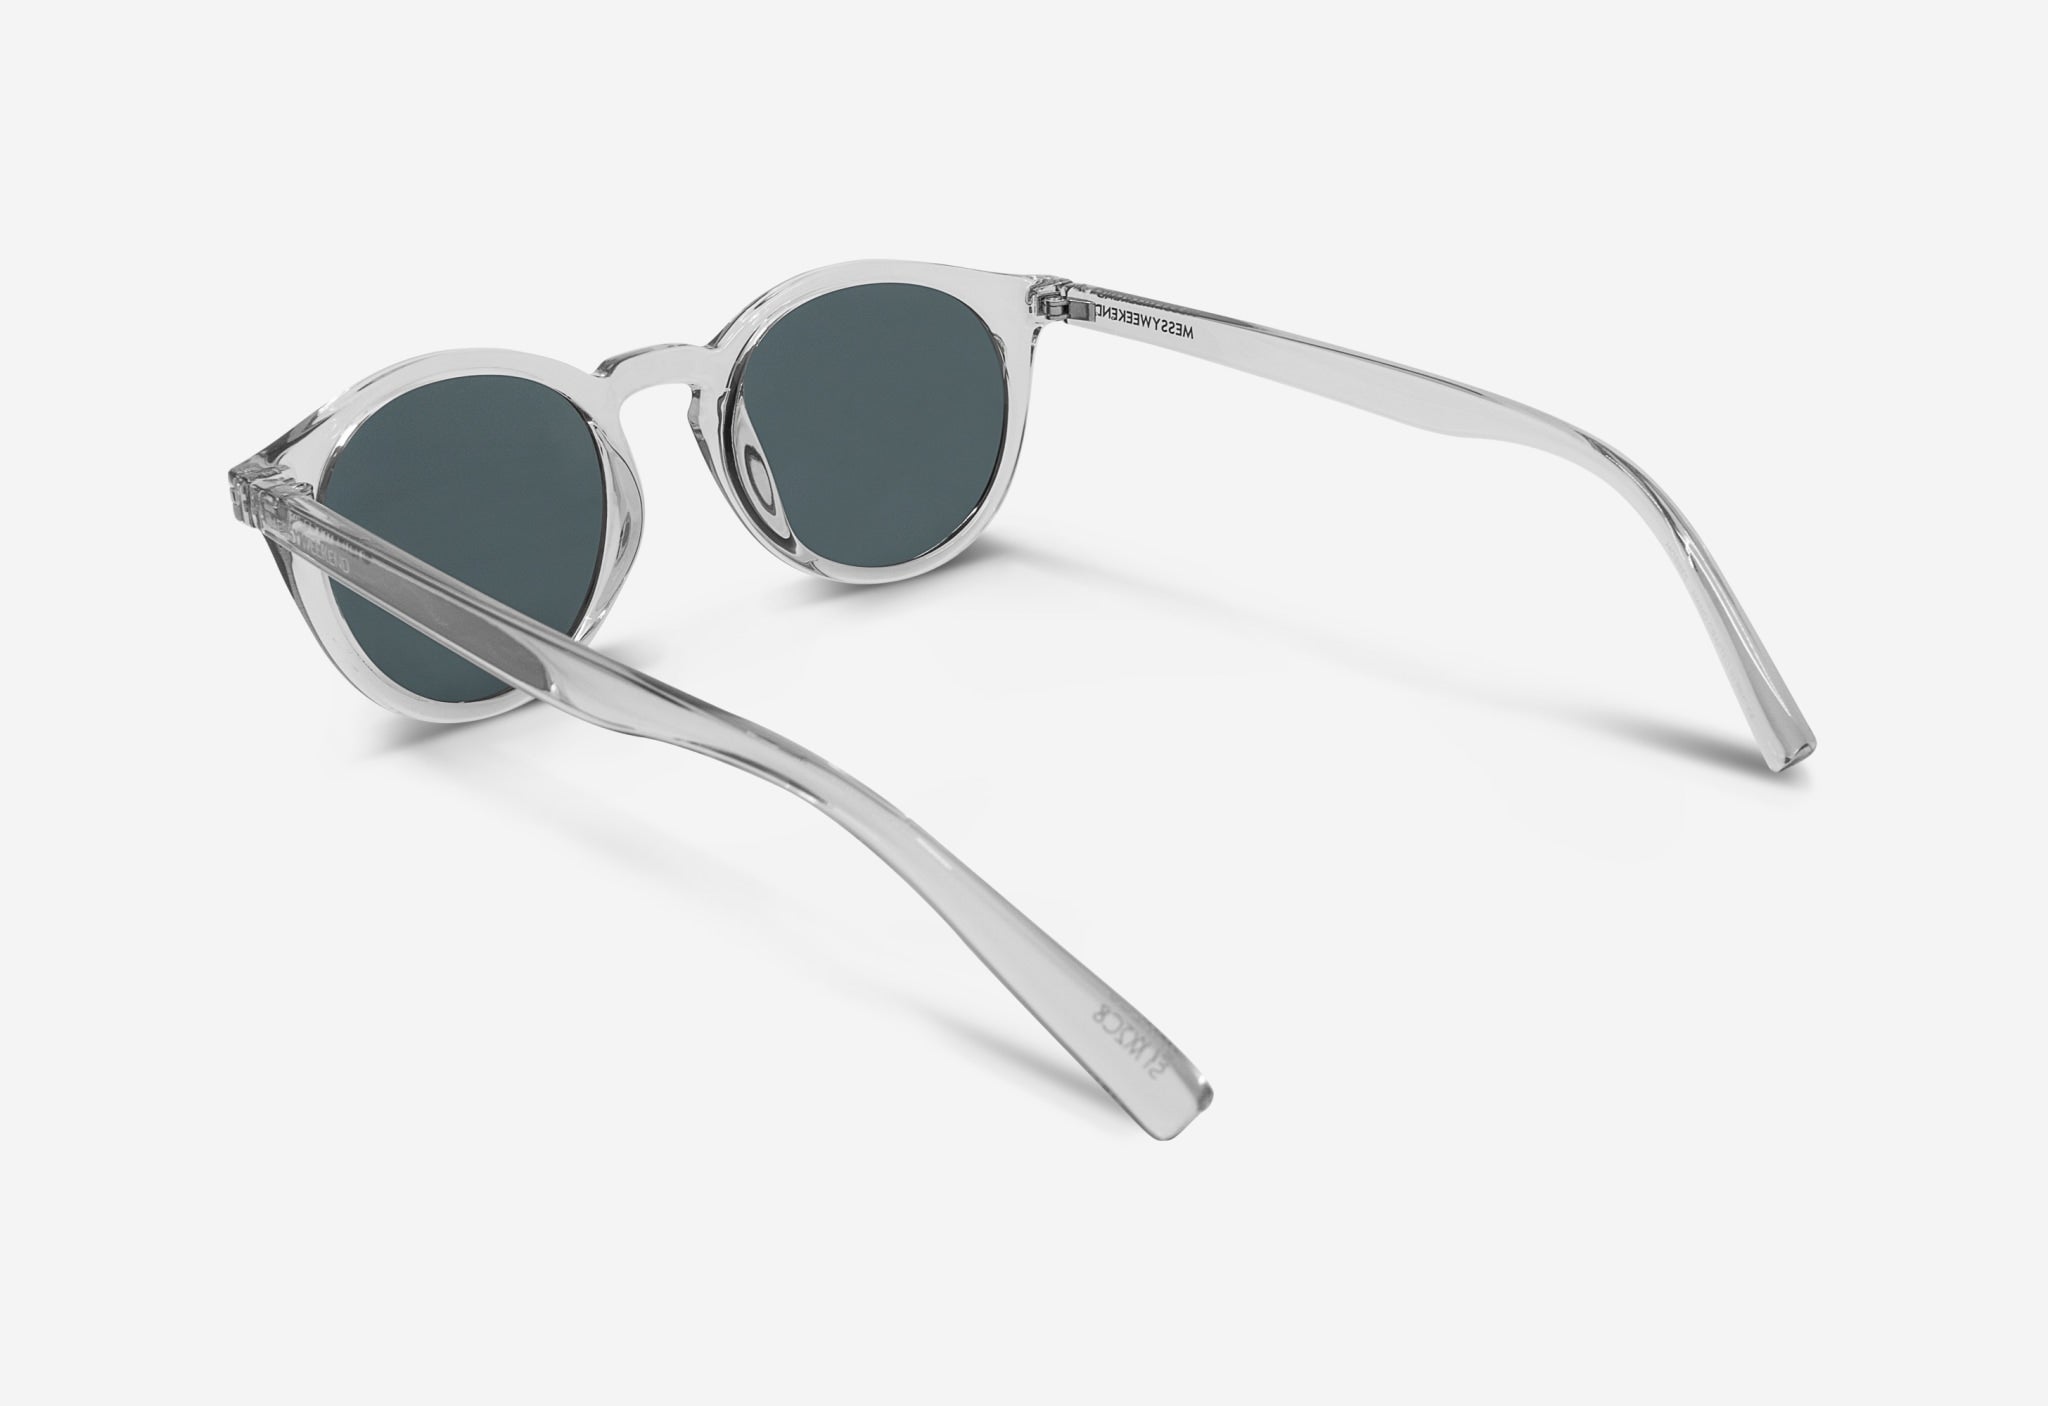 mirrored sunglasses clear frame blue lenses | MessyWeekend